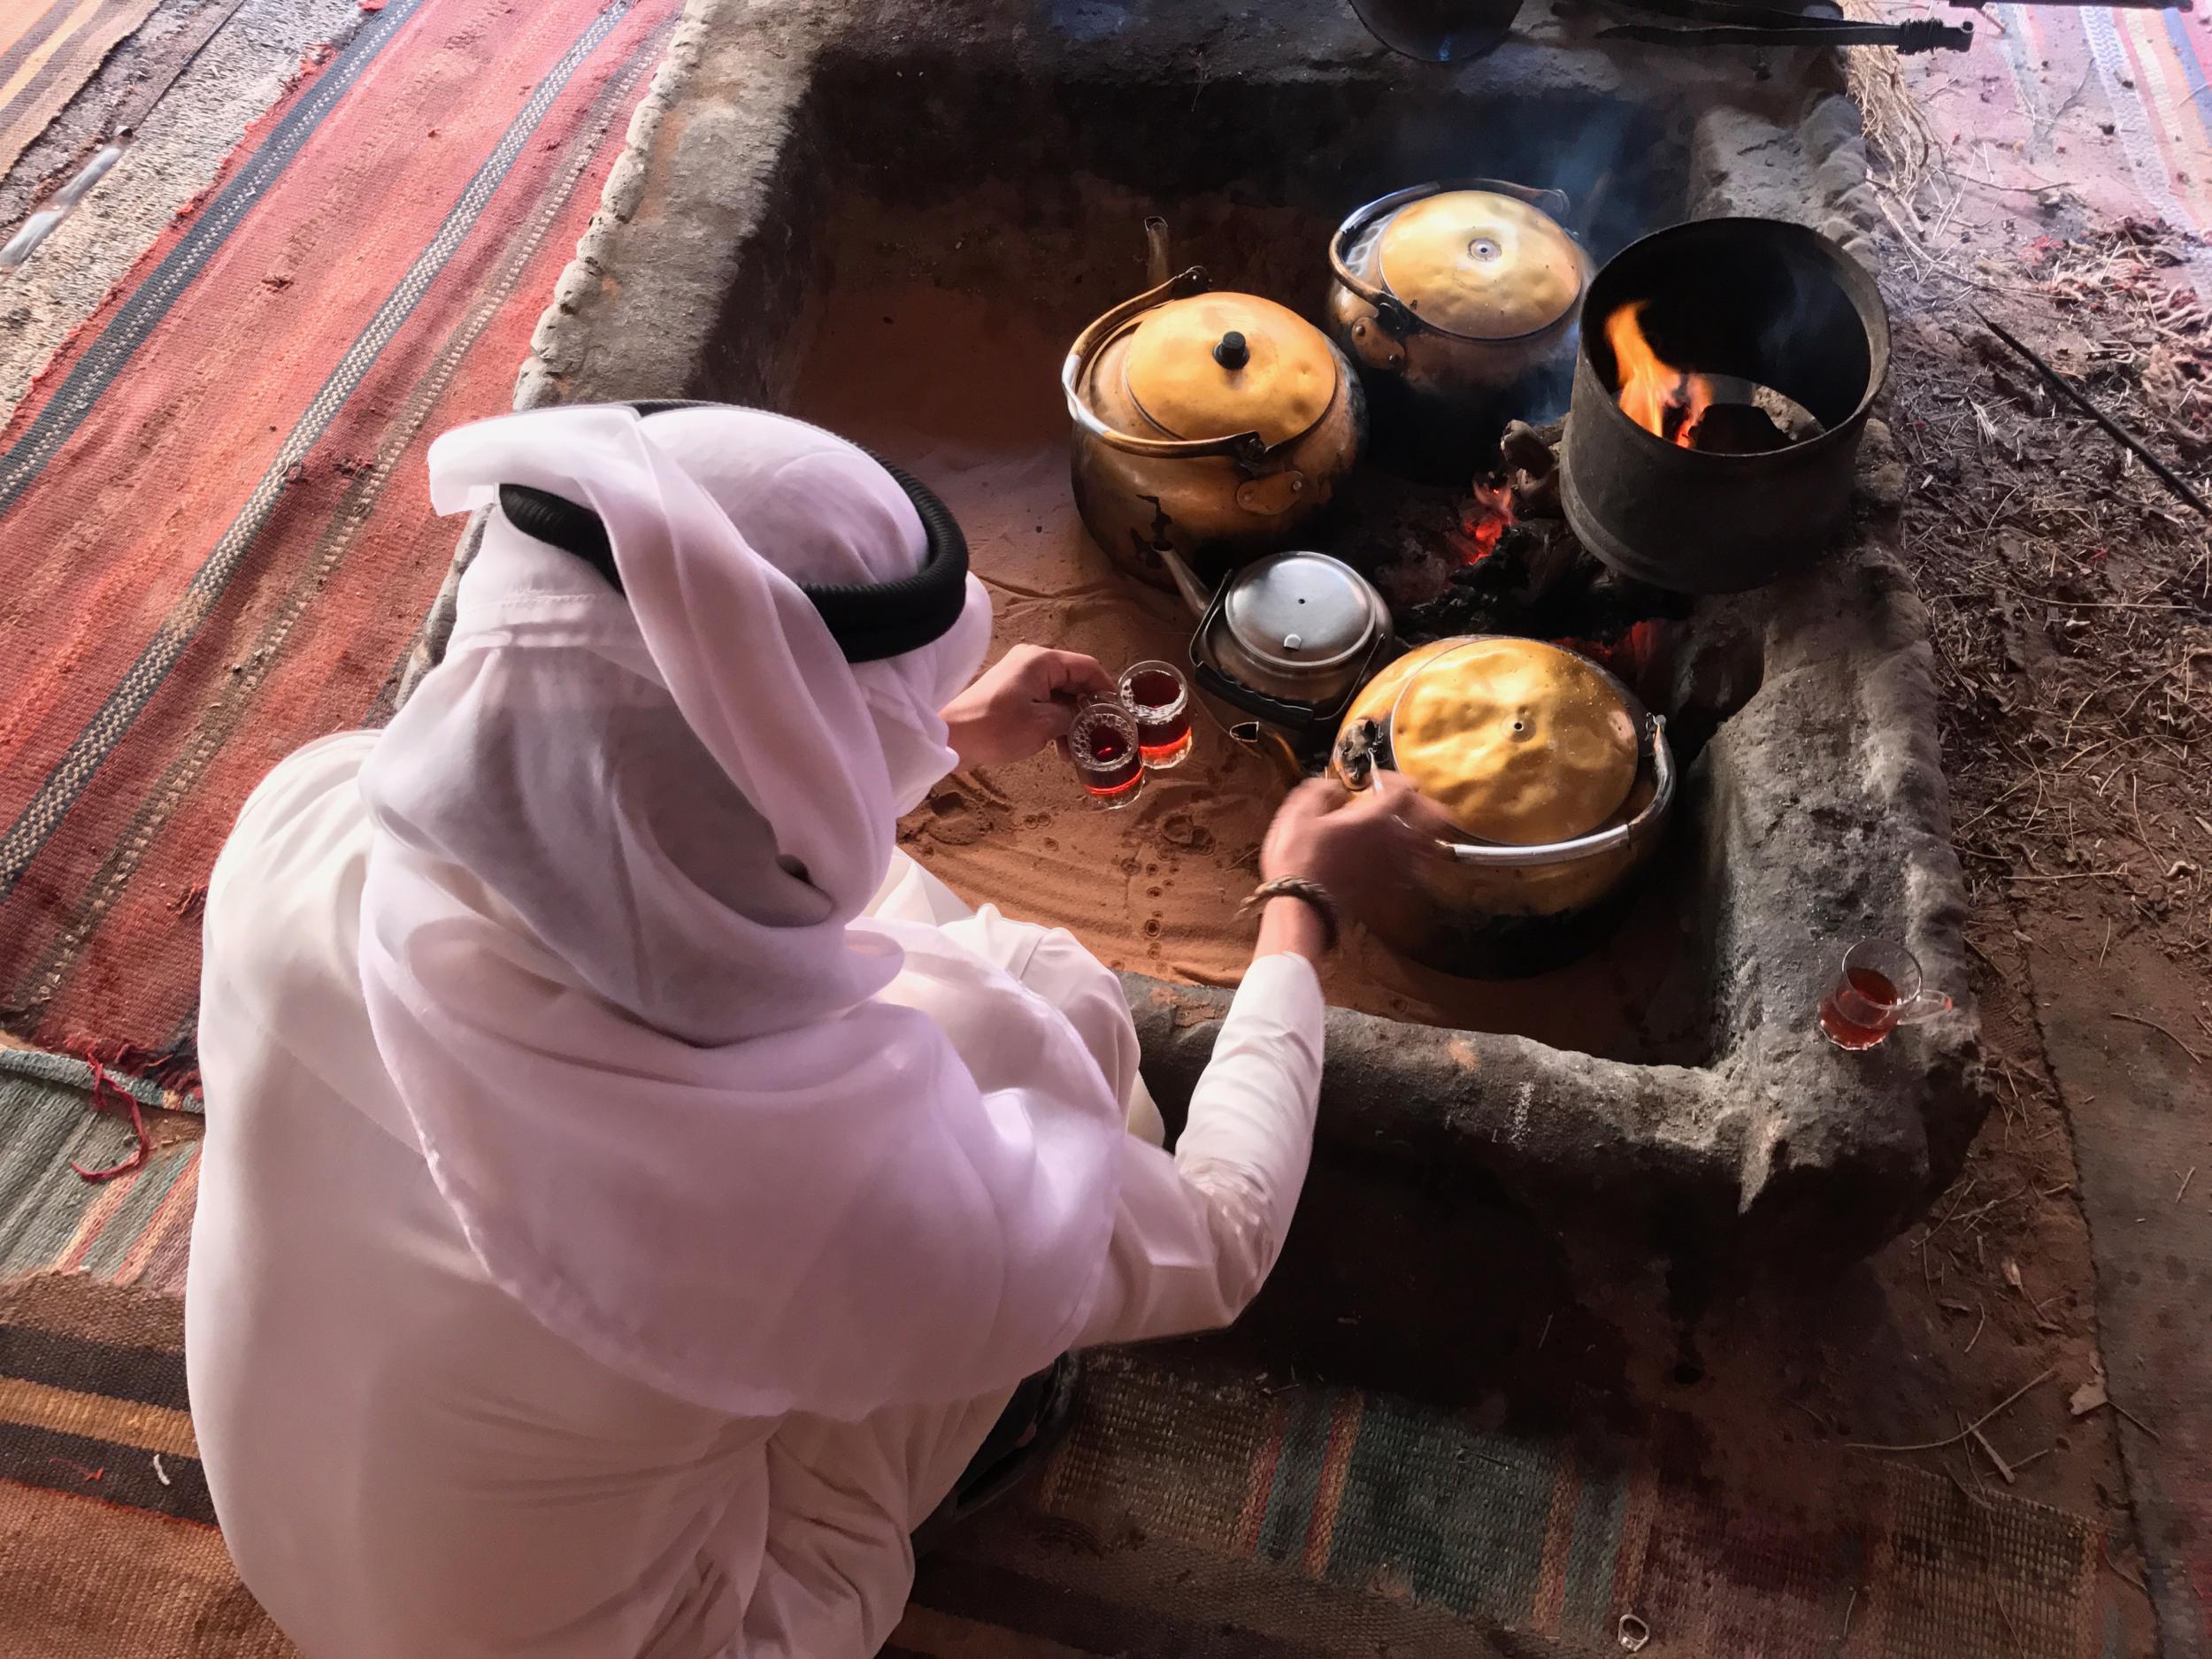 Spend a night in a Bedouin camp for a real desert experience